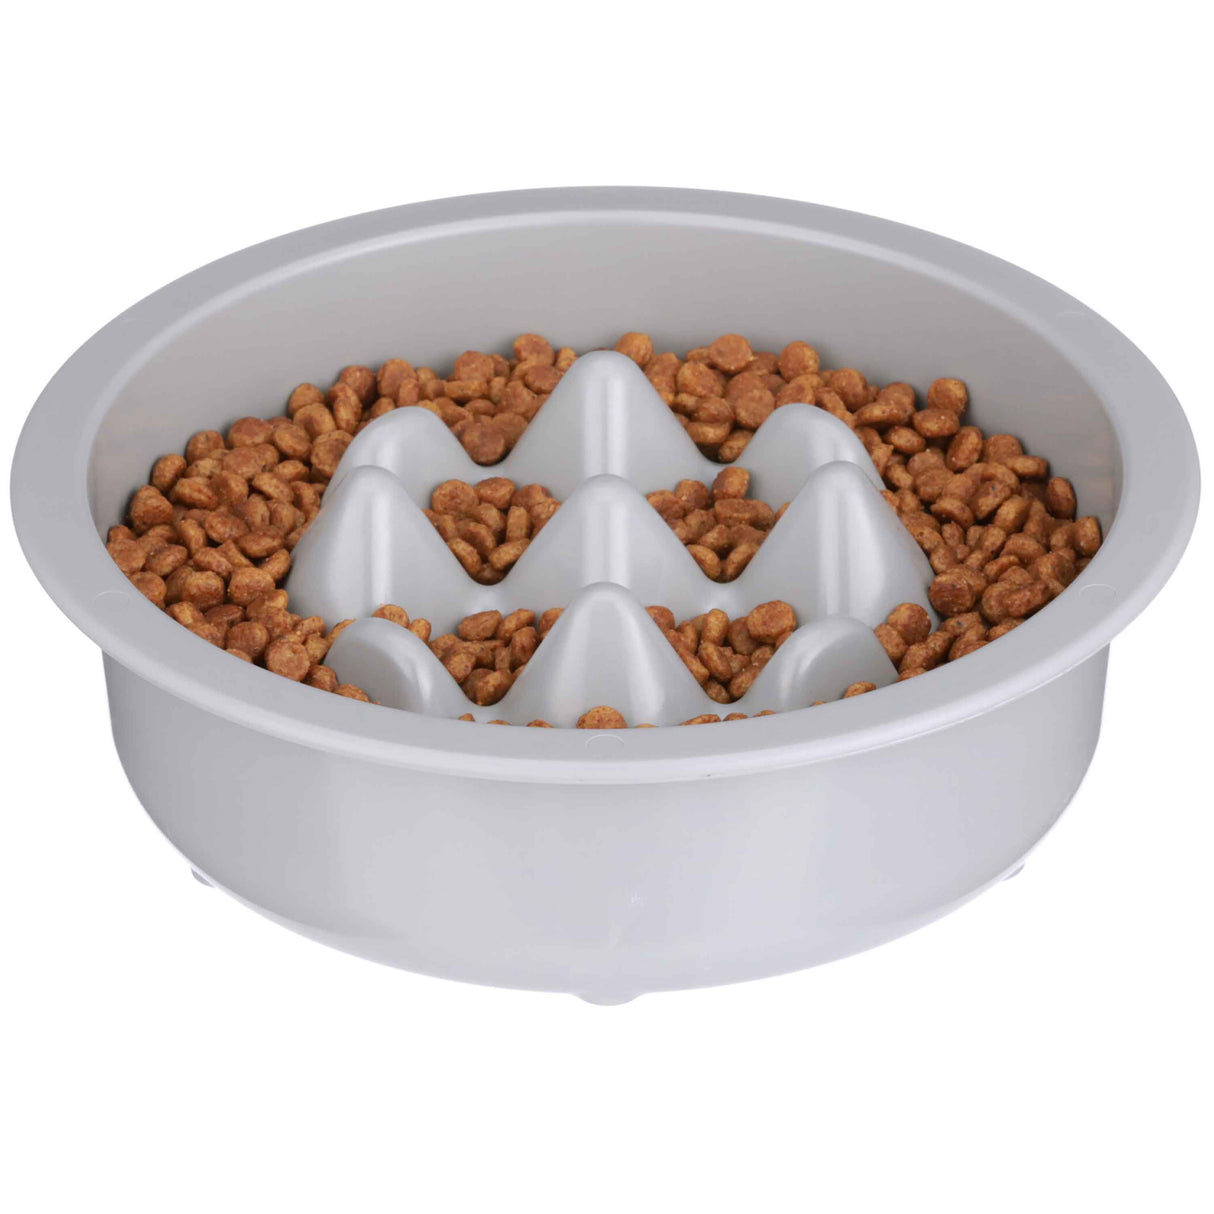 The Niner Slow Feed Bowl with dog food